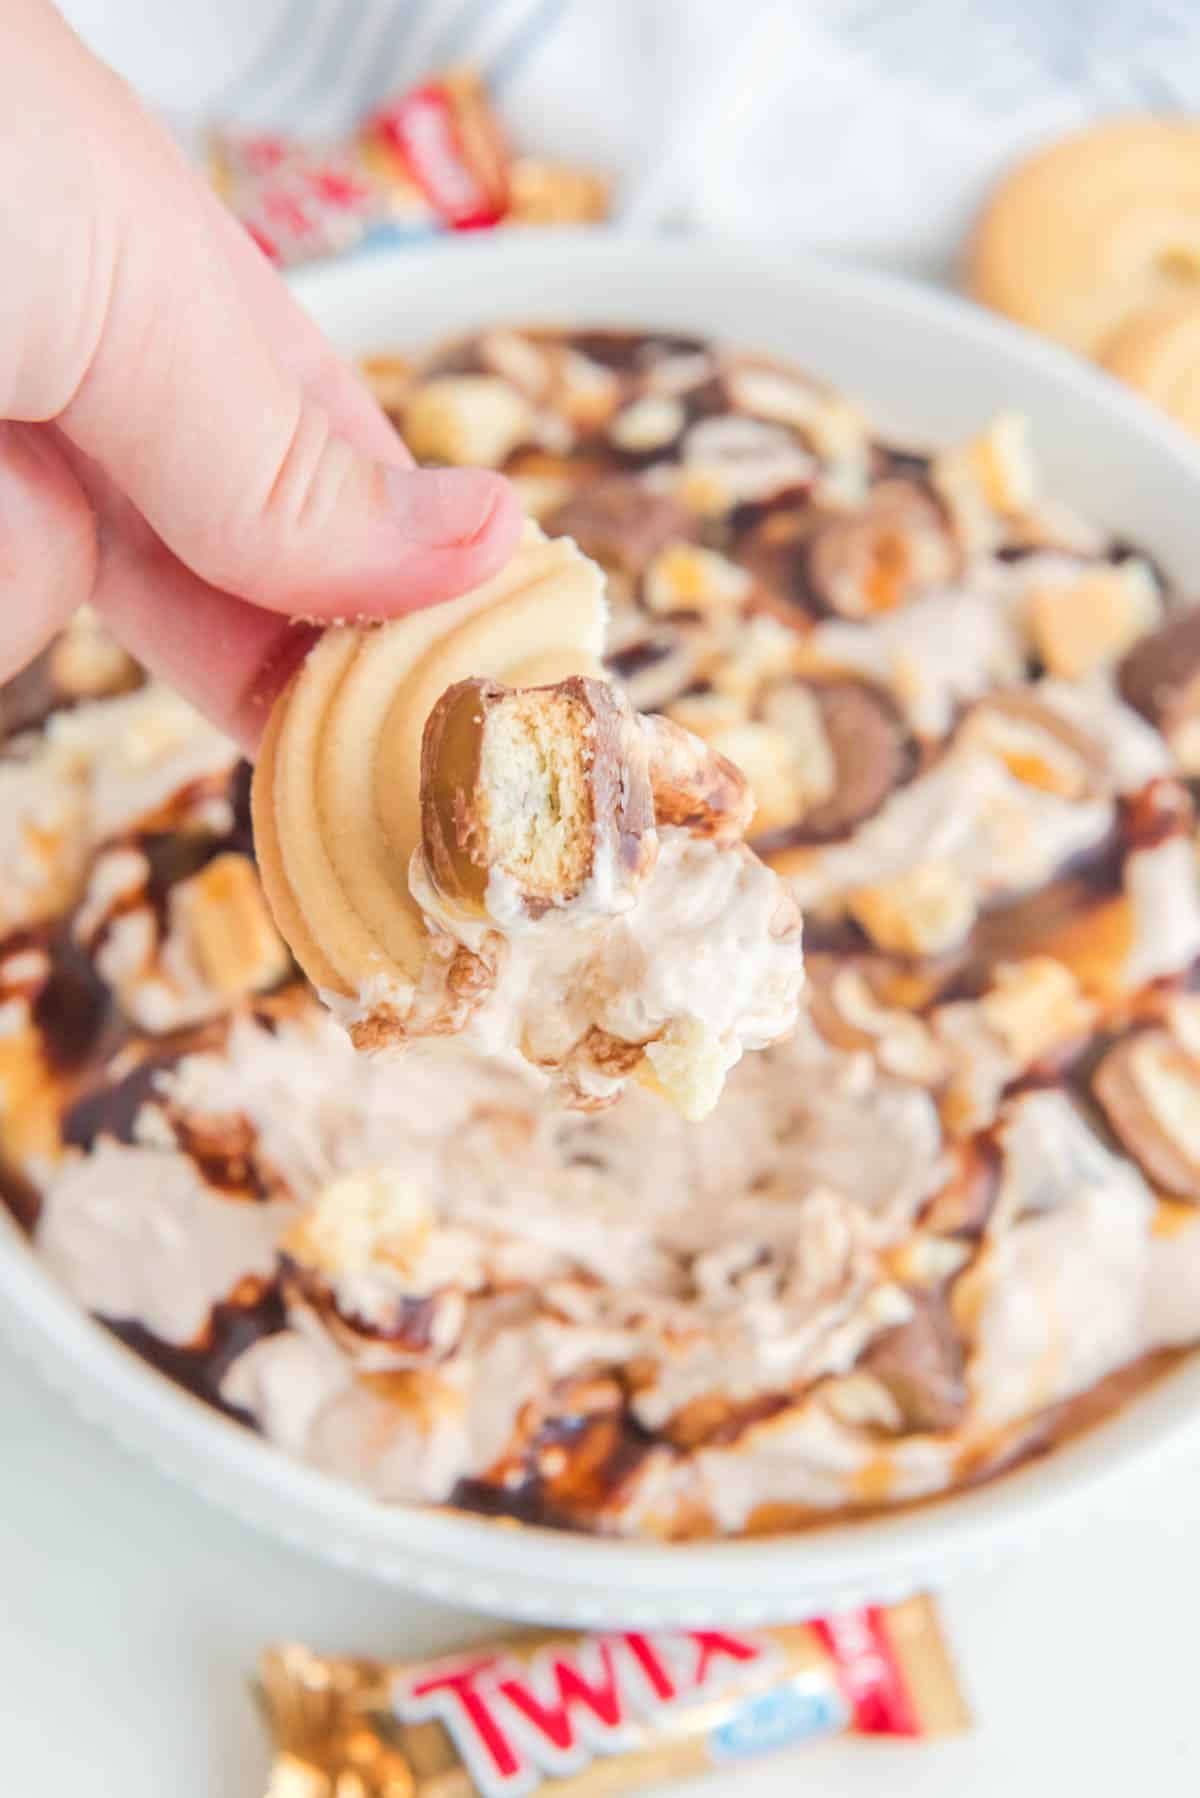 A person is dipping a cookie into a bowl of ice cream.